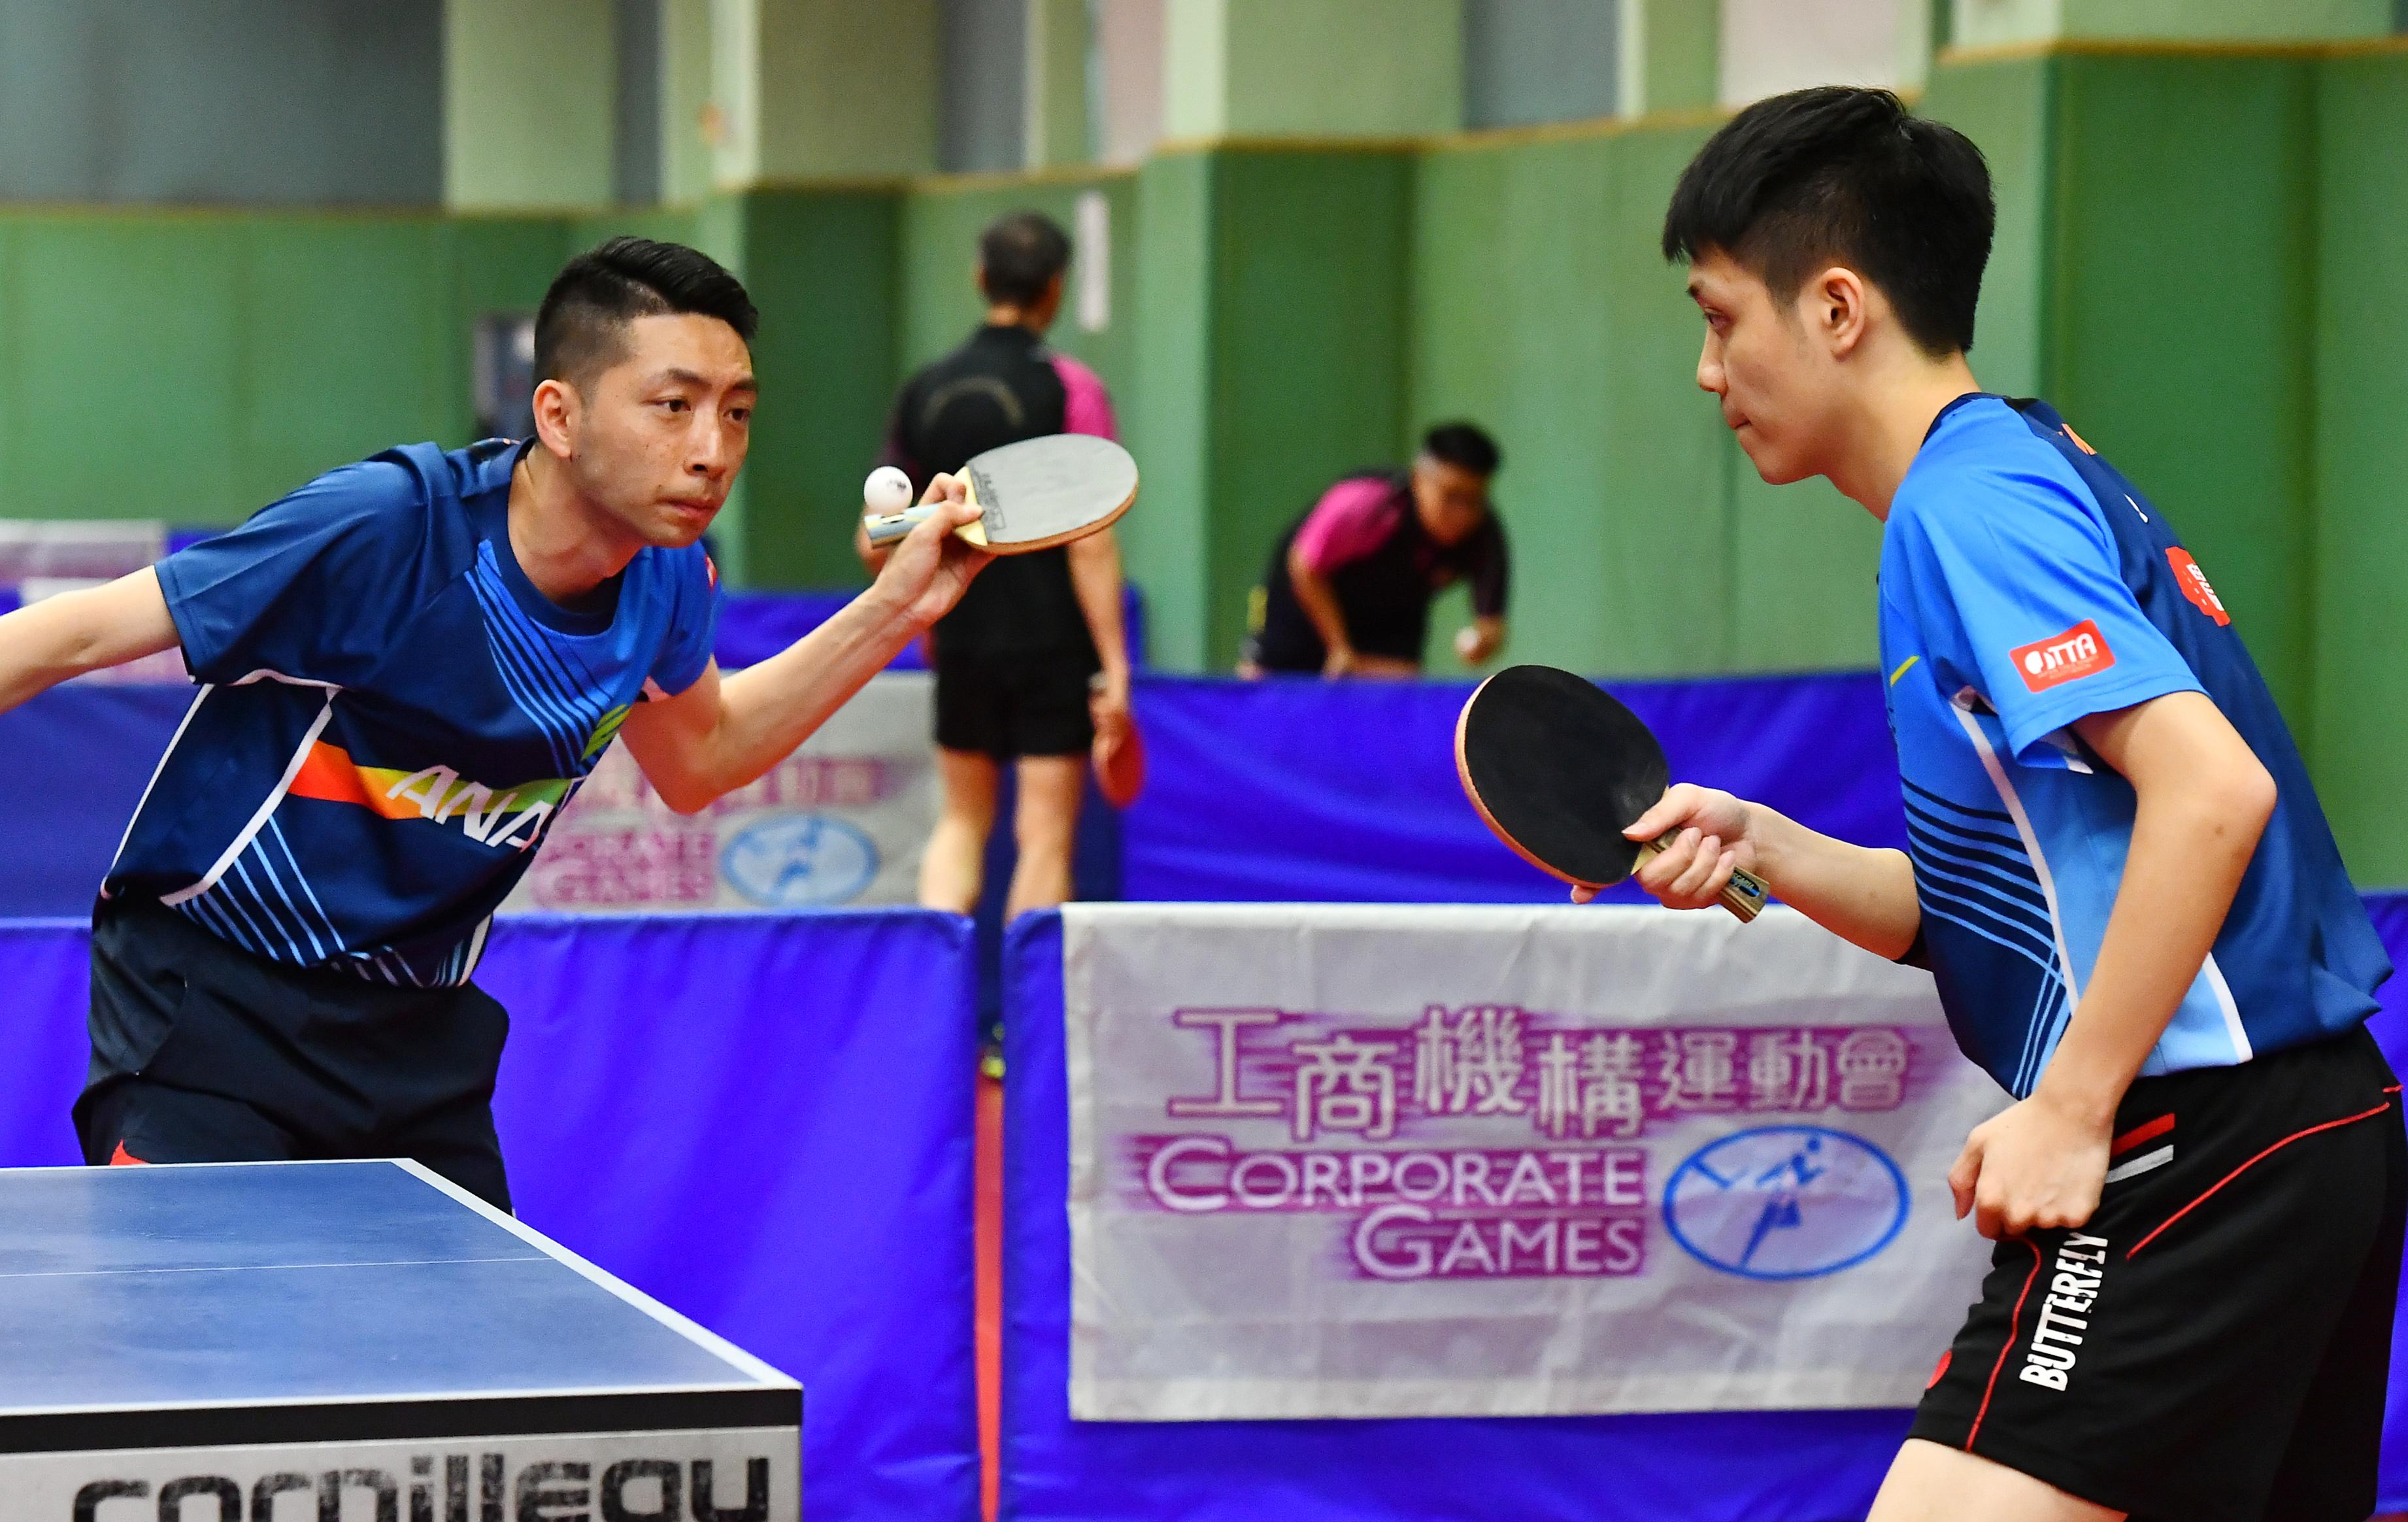 The Corporate Games 2023, organised by the Leisure and Cultural Services Department, will open for enrolment from October 17. Employees of commercial and industrial organisations and the public sector are welcome to take part in the Games. Photo shows athletes participating in a table tennis competition at the Corporate Games 2018. 